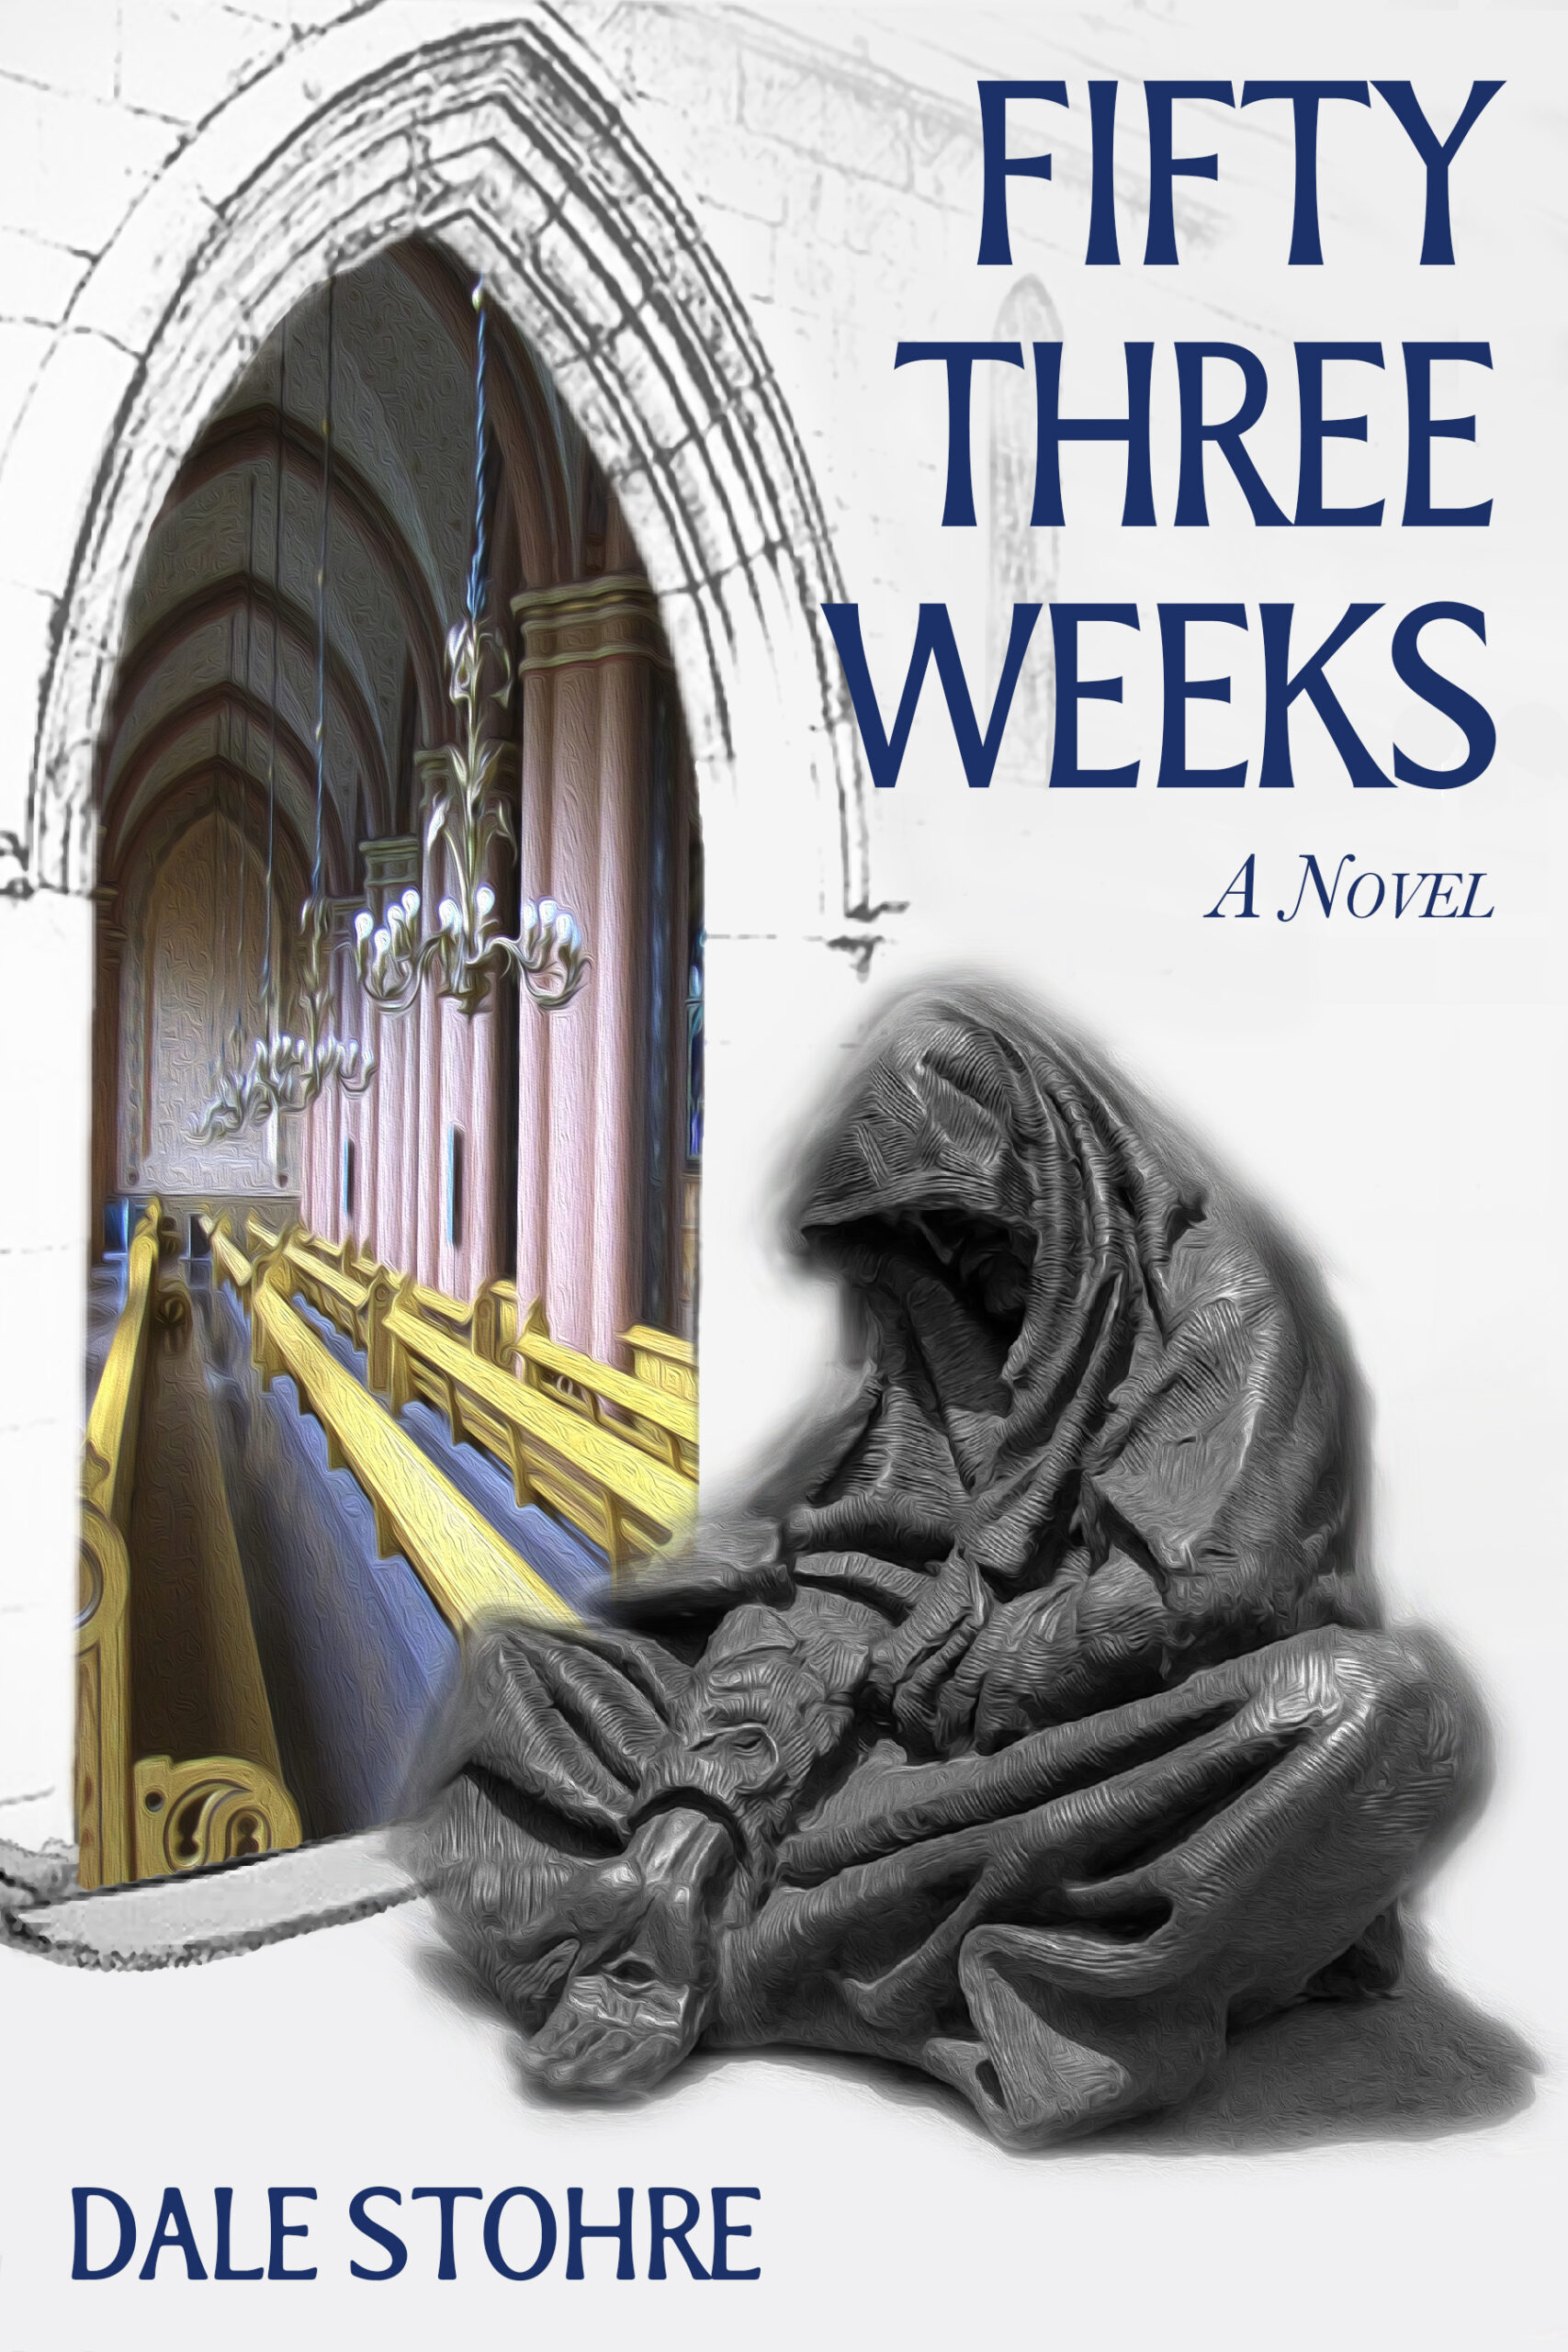 FREE: Fifty-Three Weeks by Dale Stohre